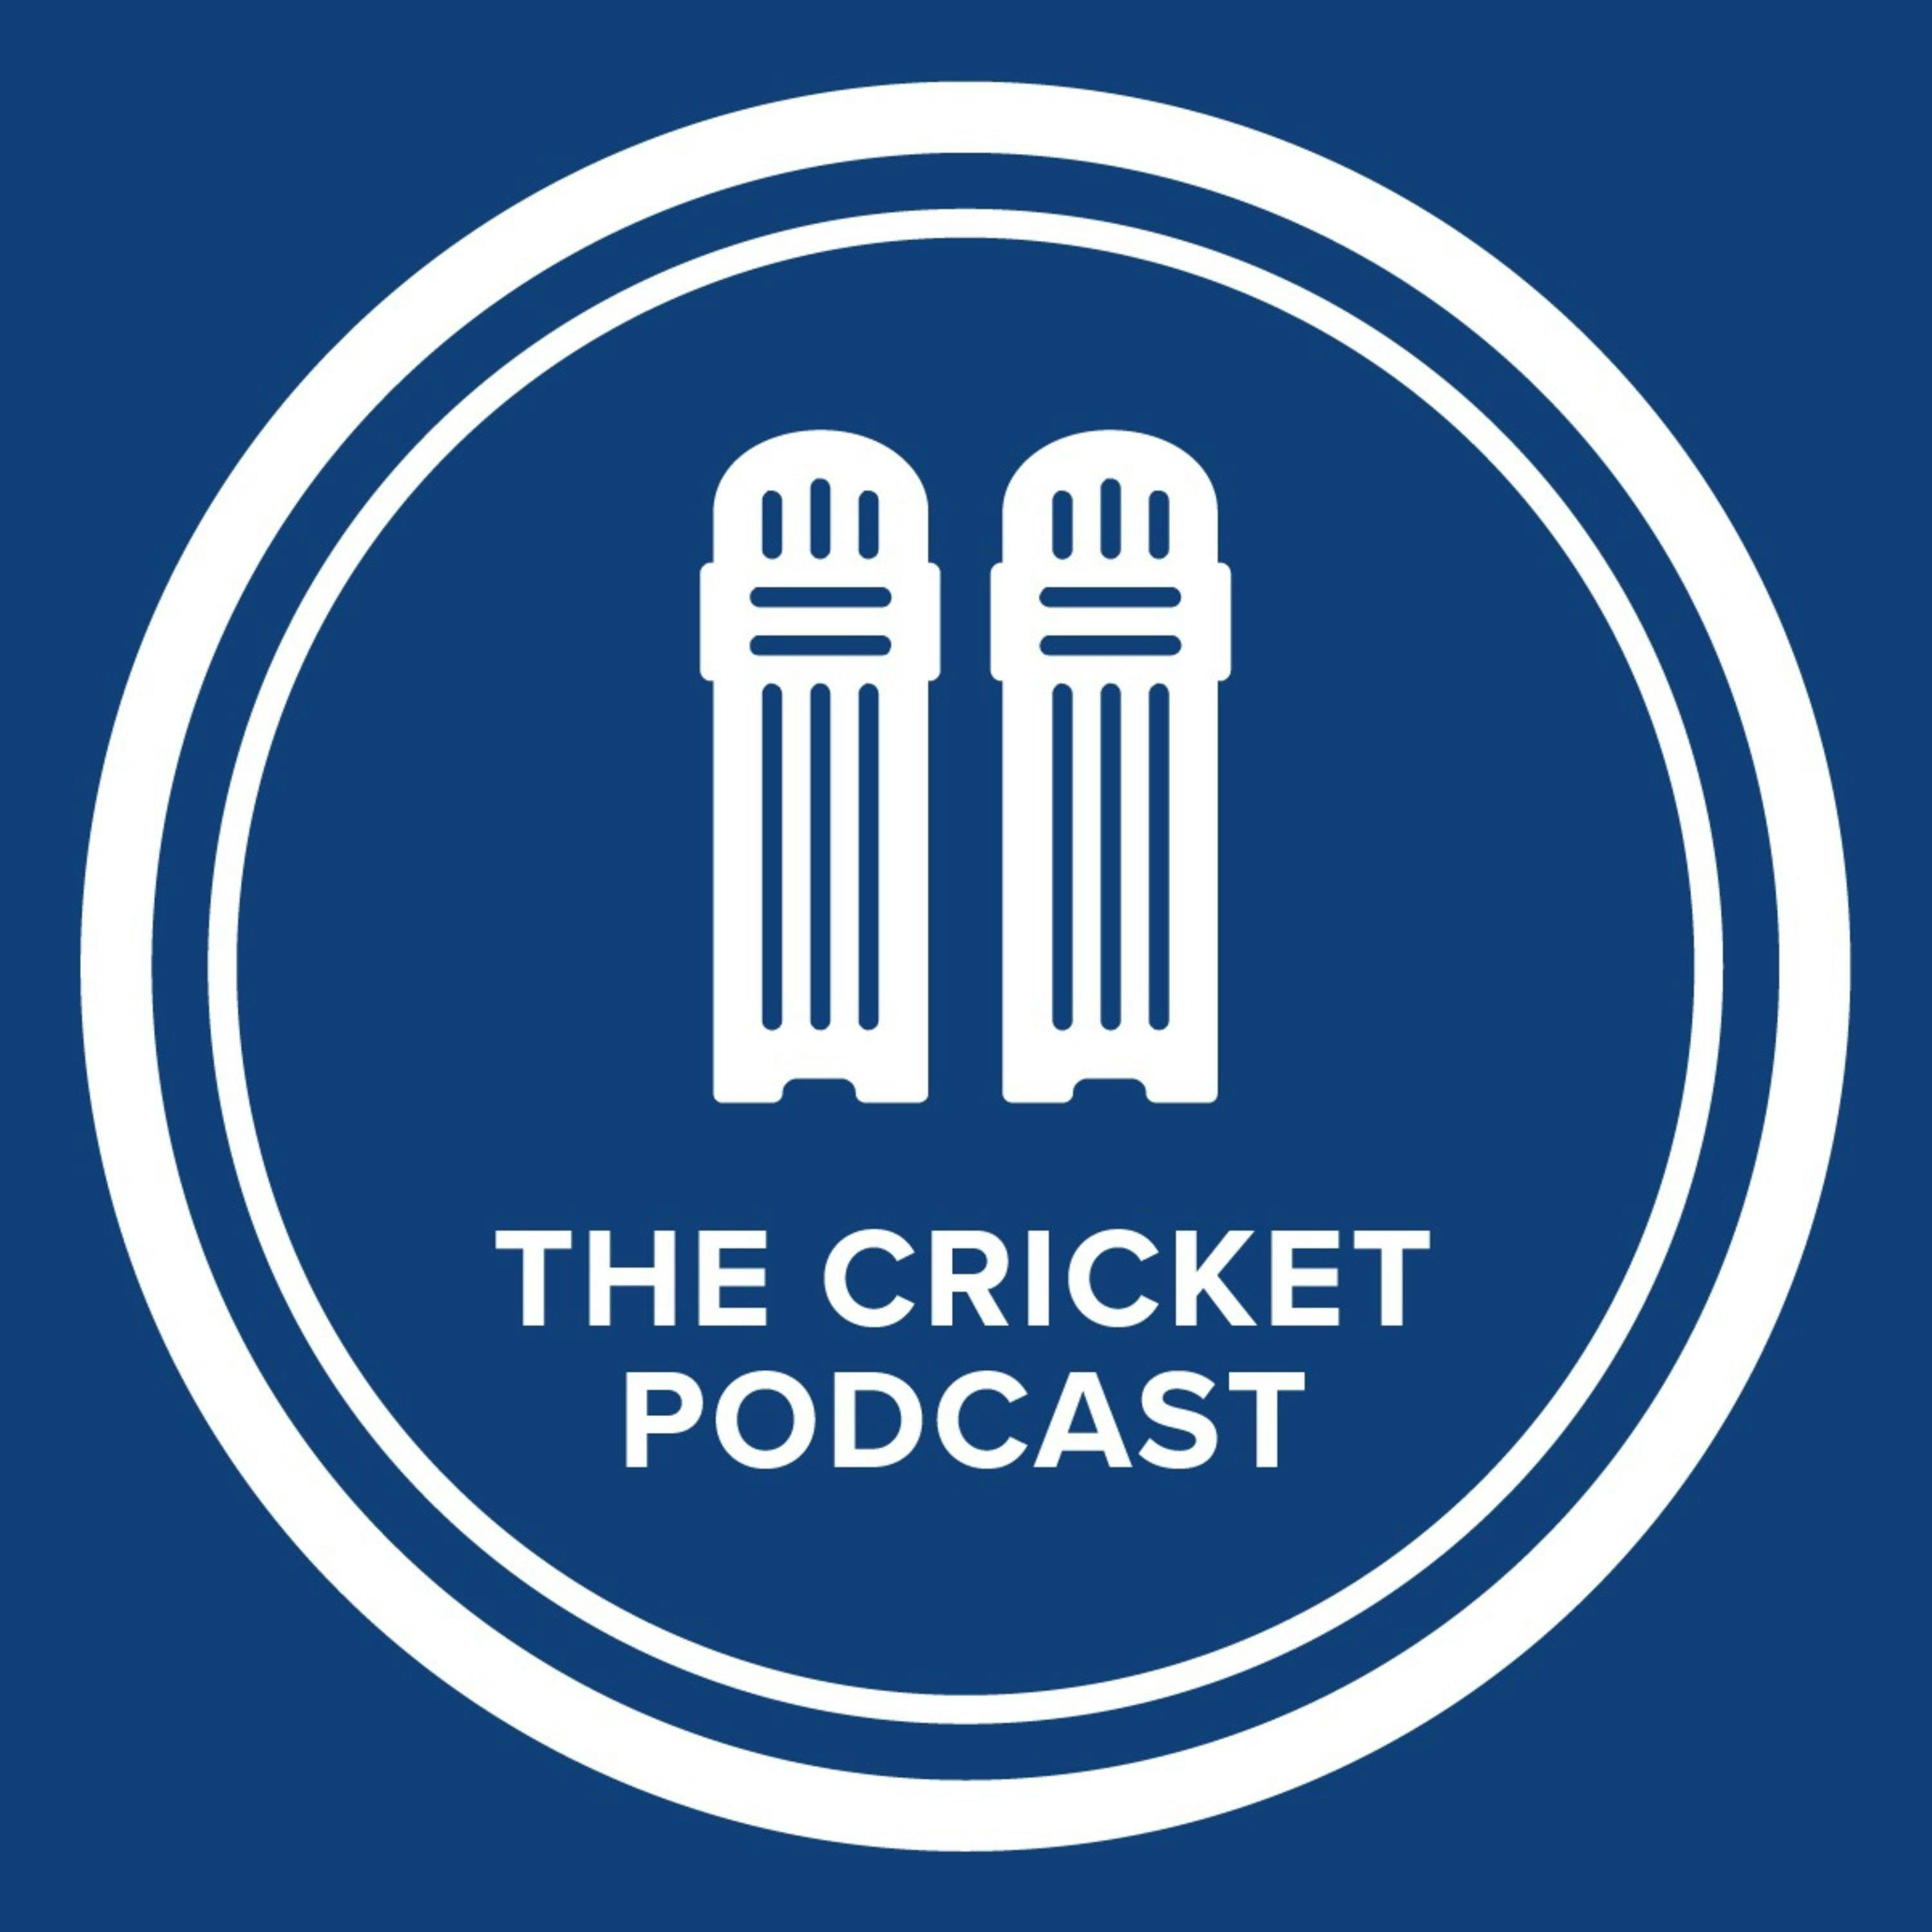 SPECIAL MAILBAG EPISODE: TCP Tackle our fans questions on the Football World Cup, IPL Retentions and England Cricket!